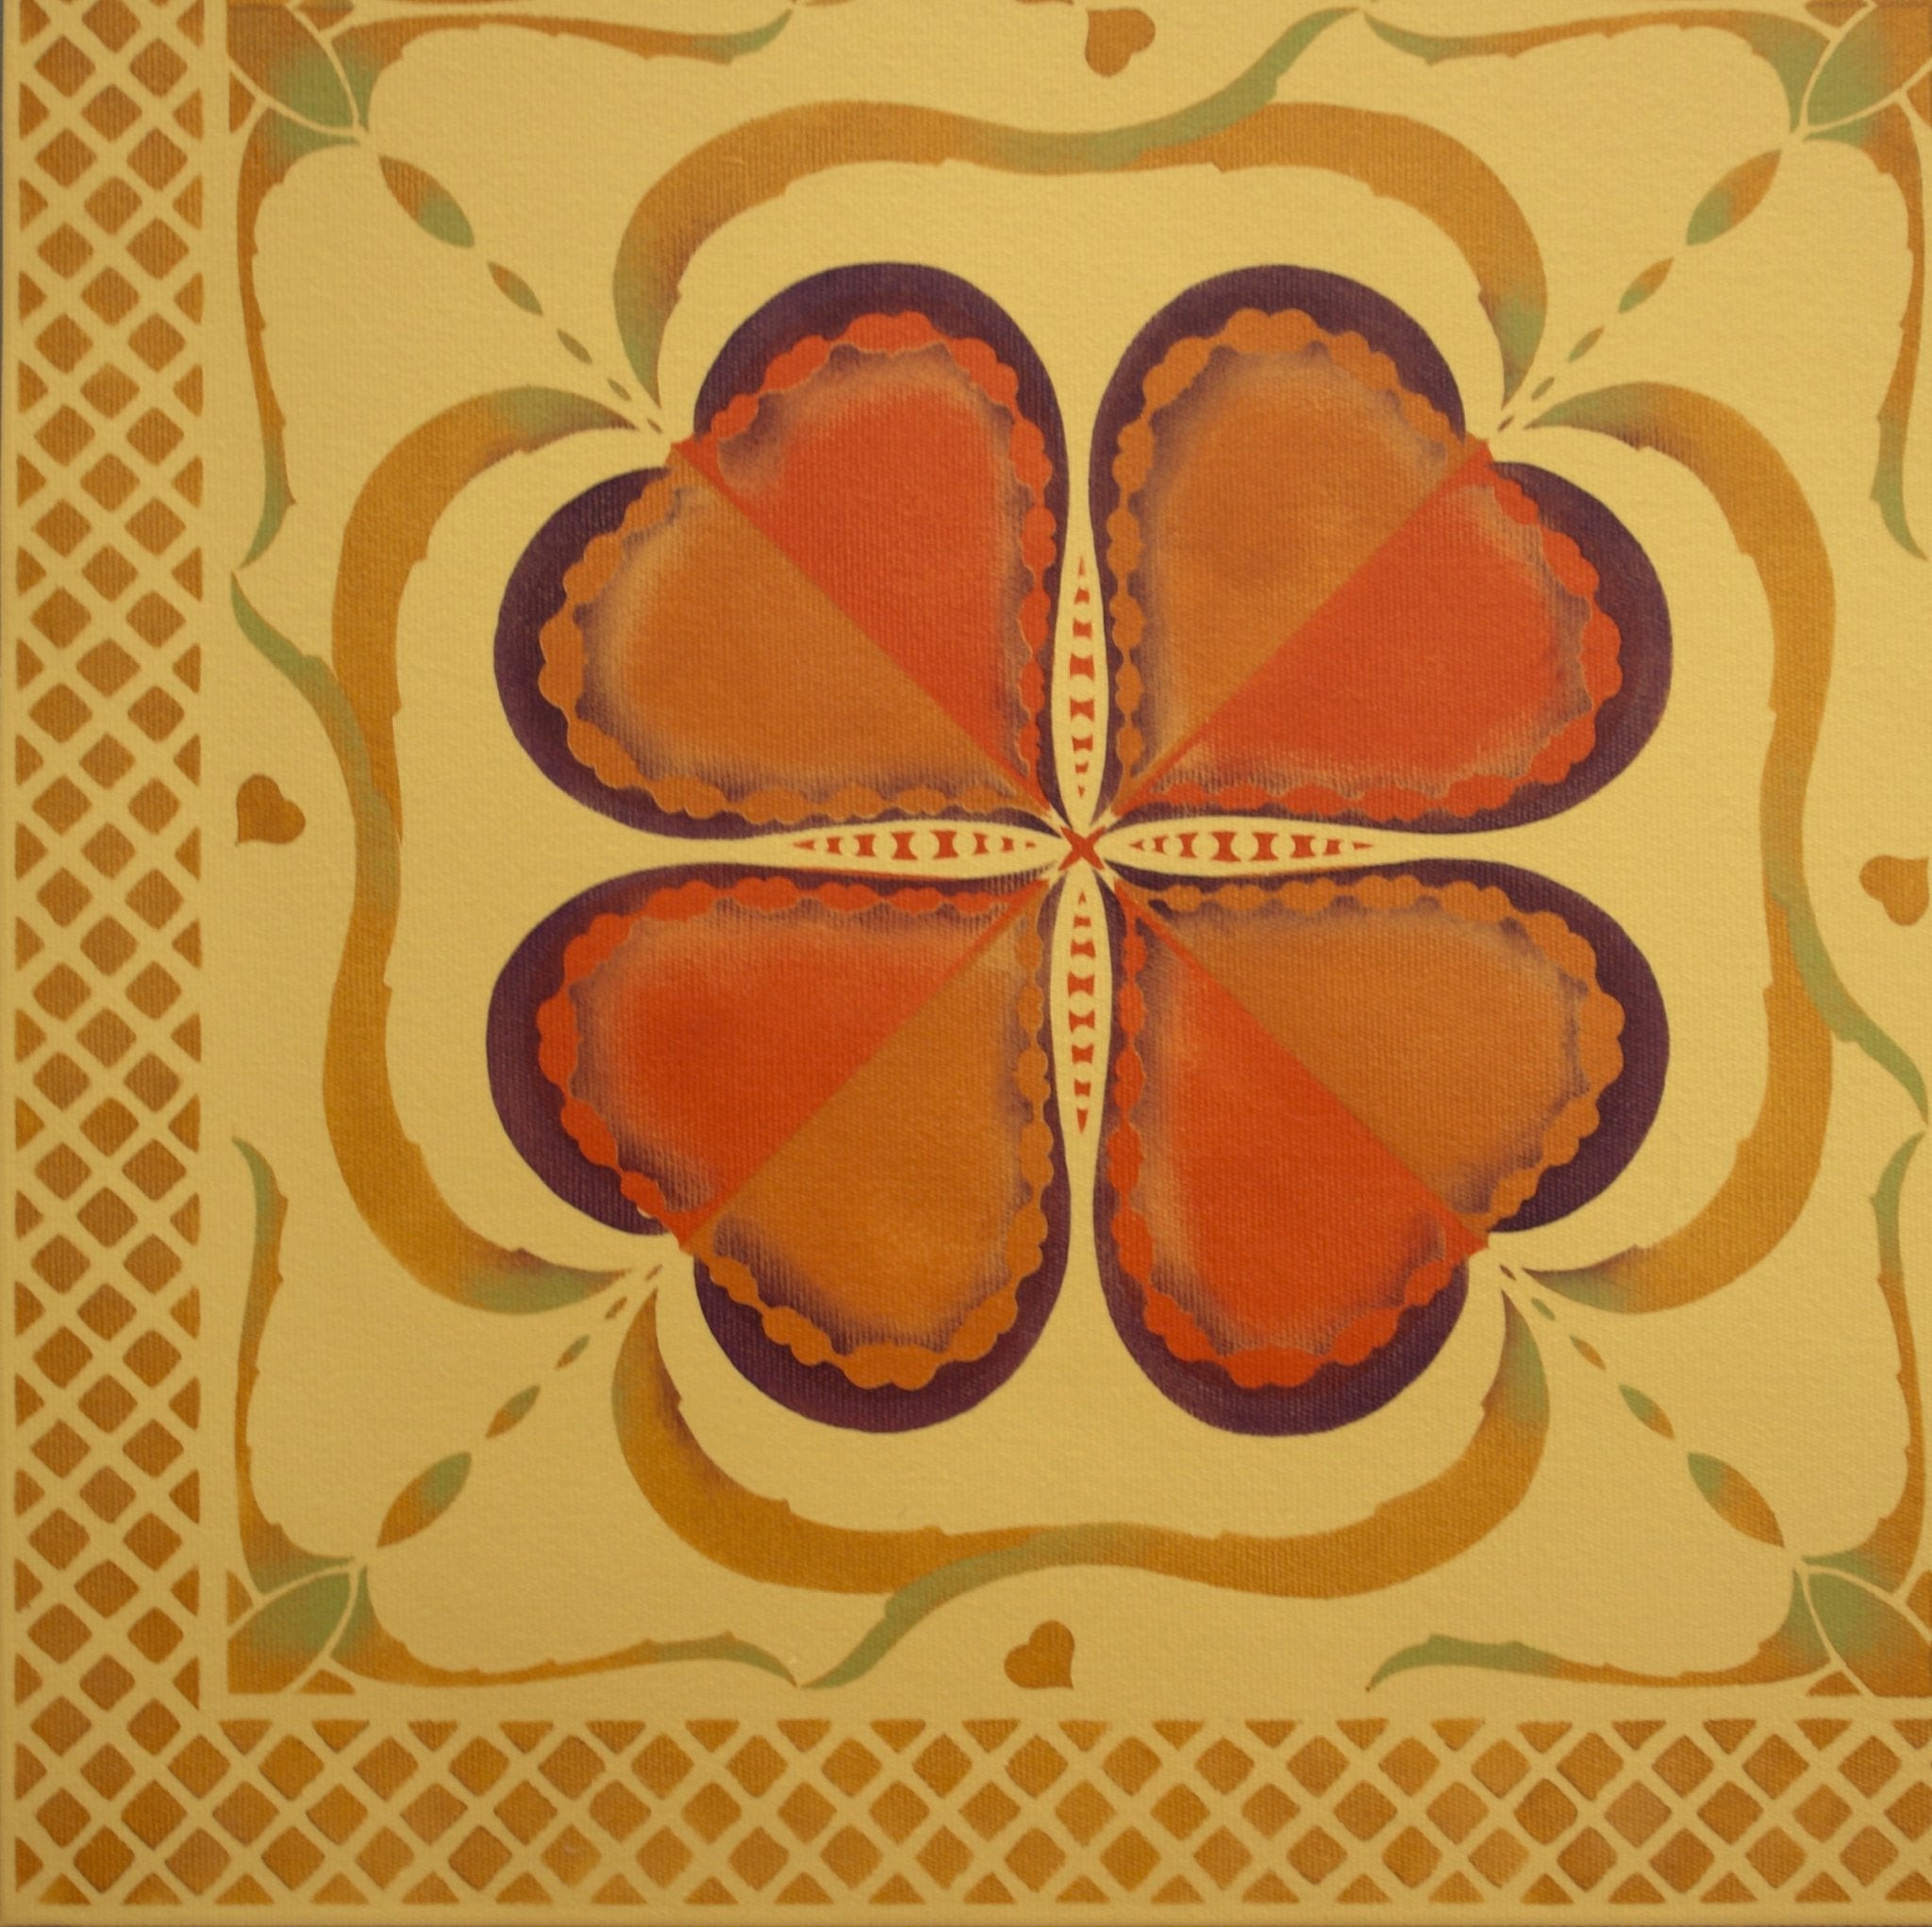 A close up image of the corner of Honeymoon Floorcloth #1.